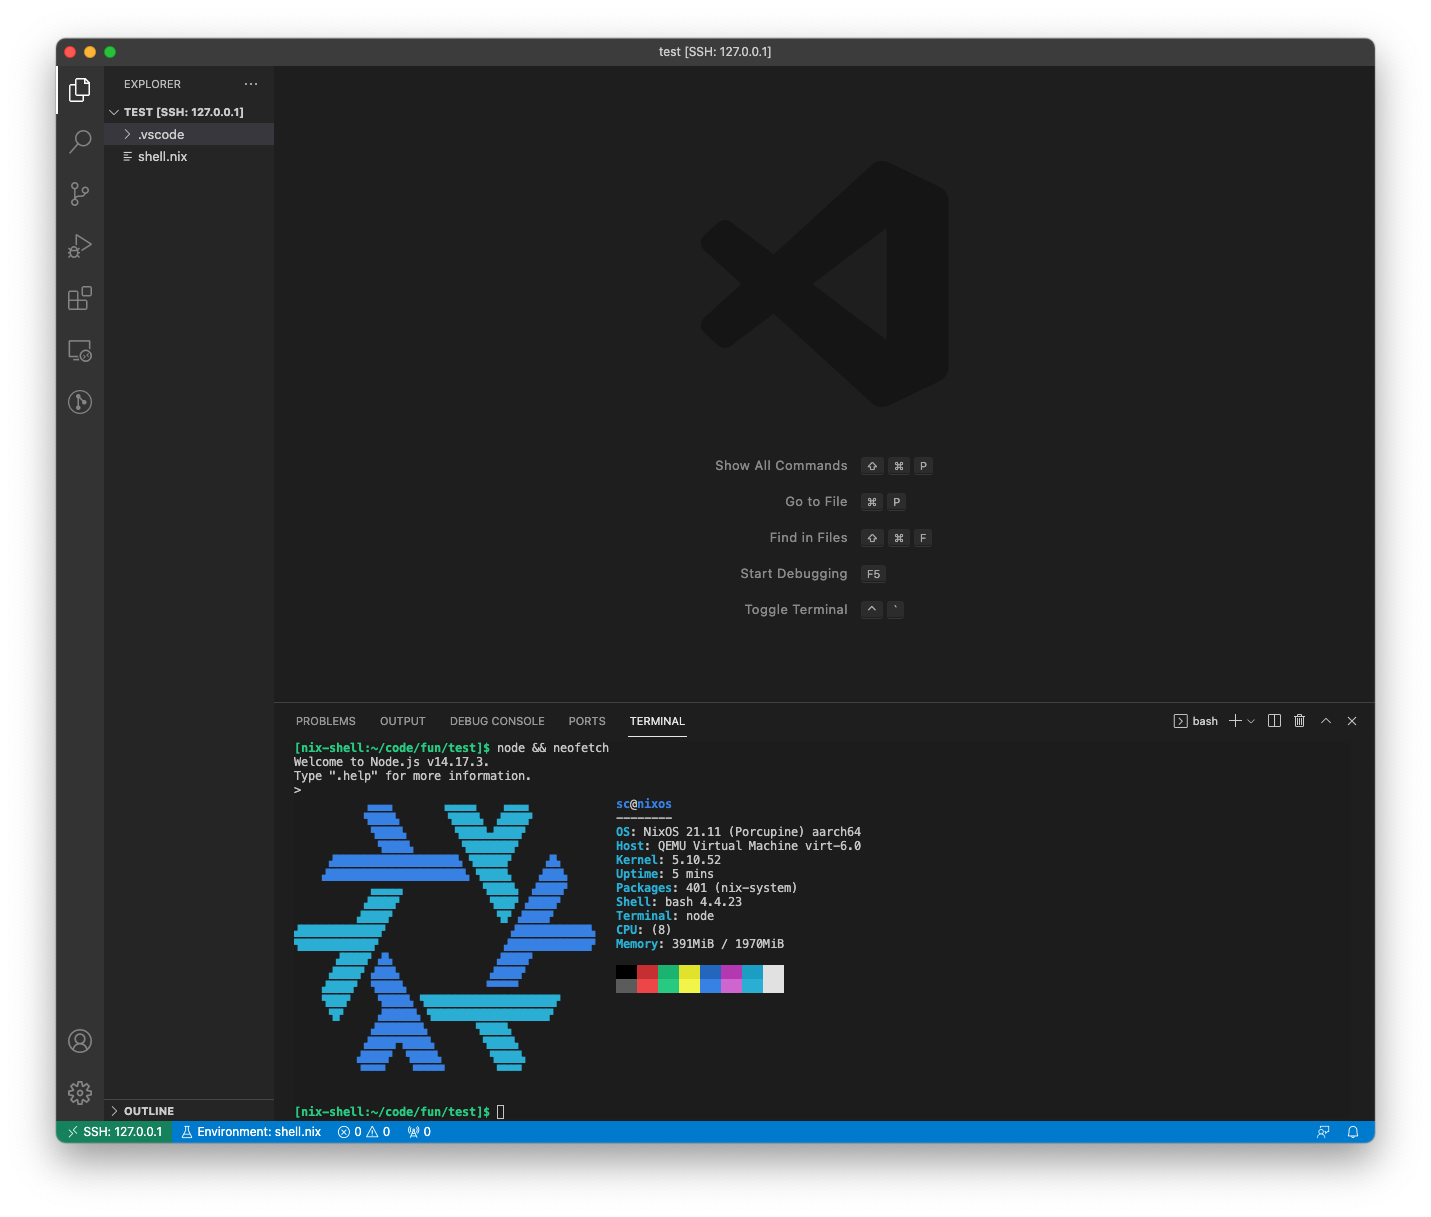 Visual Studio Code window showing NixOS as the output from neofetch in the integrated terminal